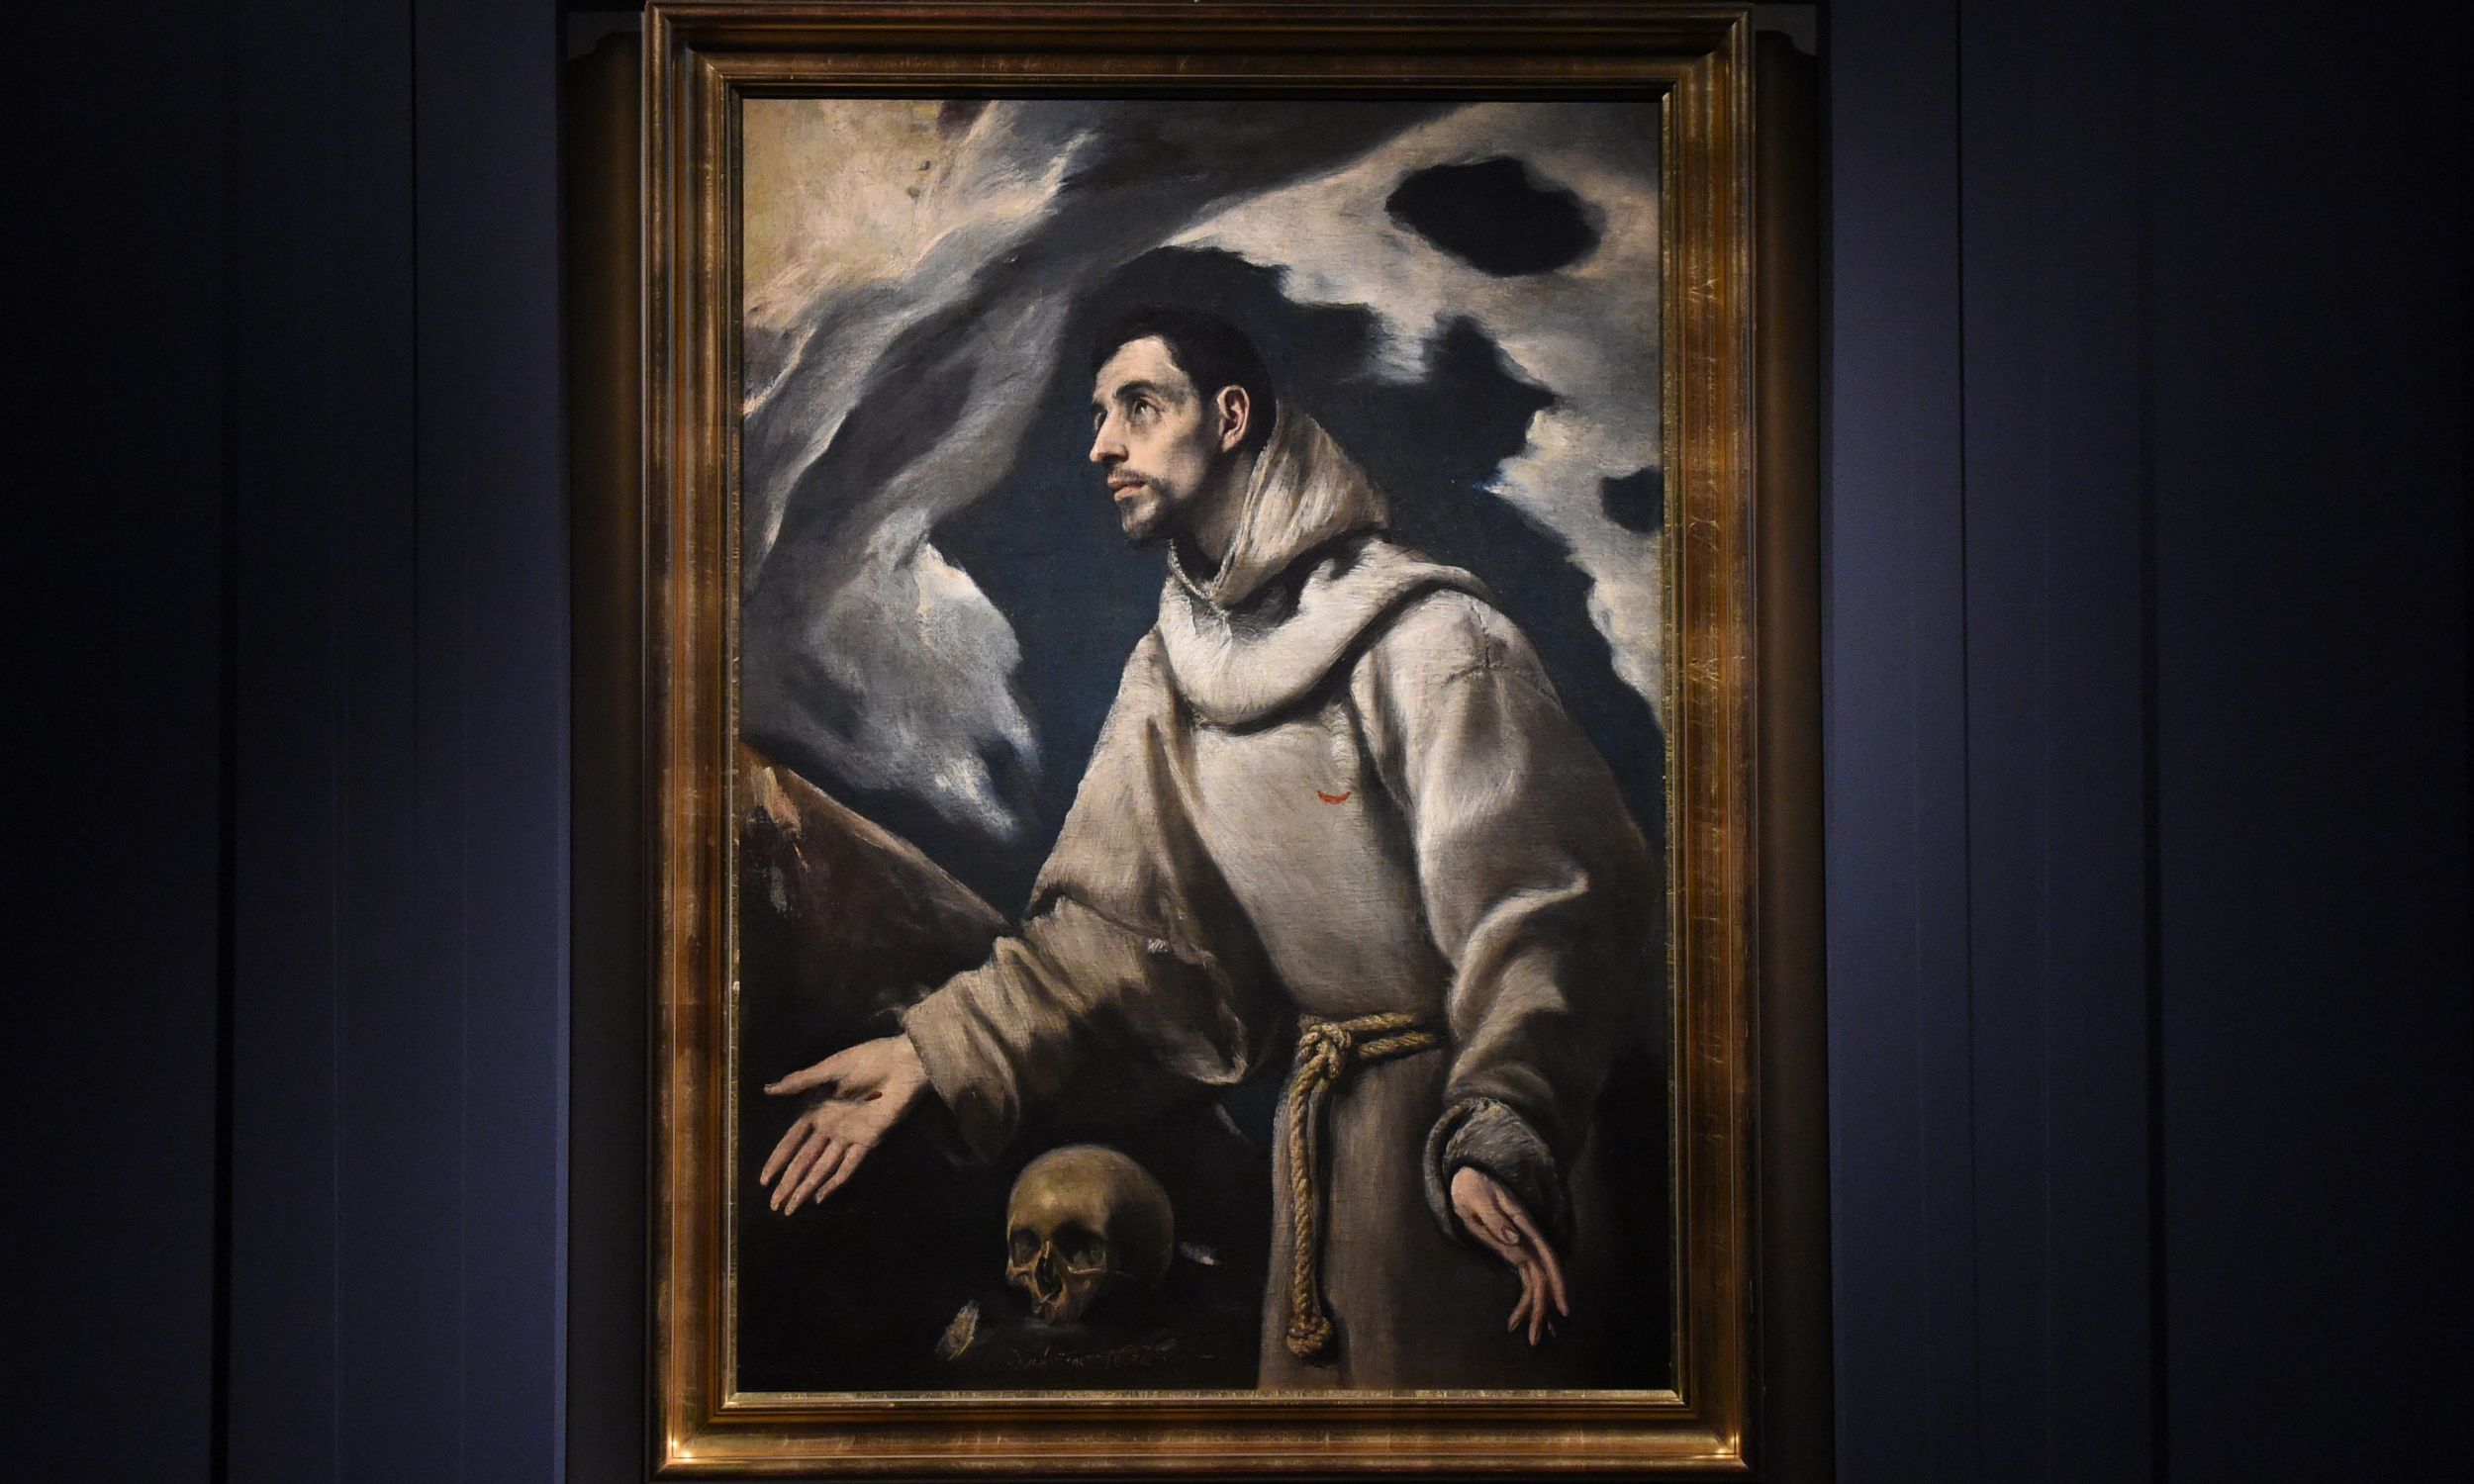 The “Ecstasy of Saint Francis” painting from the collection of the Diocesan Museum in Siedlce is the only work of El Greco in the Polish collections. The painting was found in 1964 in the collection of the parish priest of one of the parishes near Siedlce. Photo. PAP/Radek Pietruszka